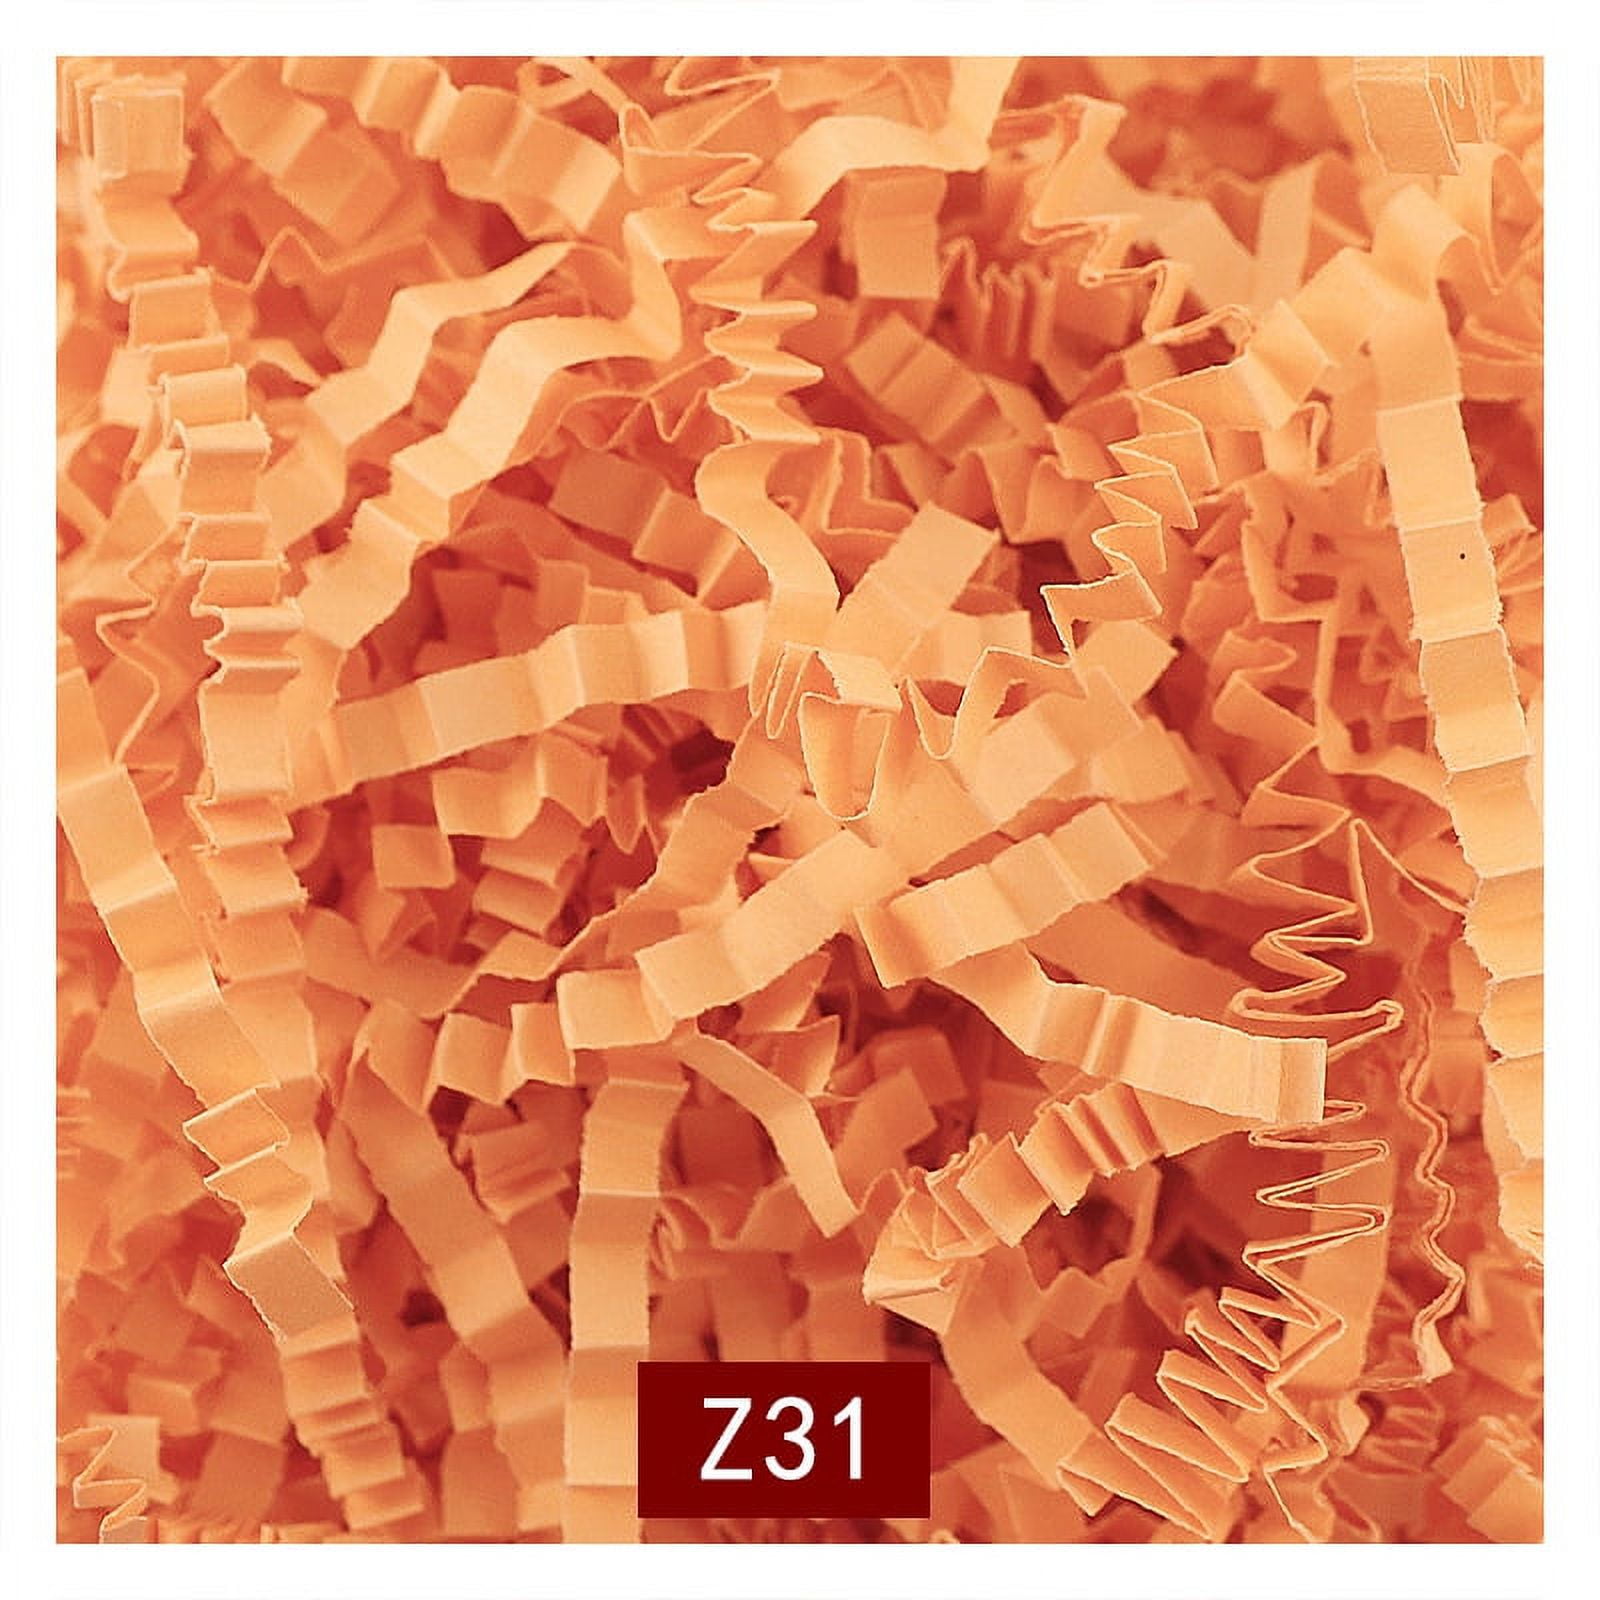 PACKHOME 0.5 LB Crinkle Cut Paper Shred Filler, Red Shredded Paper for Gift  Baskets, Crinkle Paper for Gift Wrapping